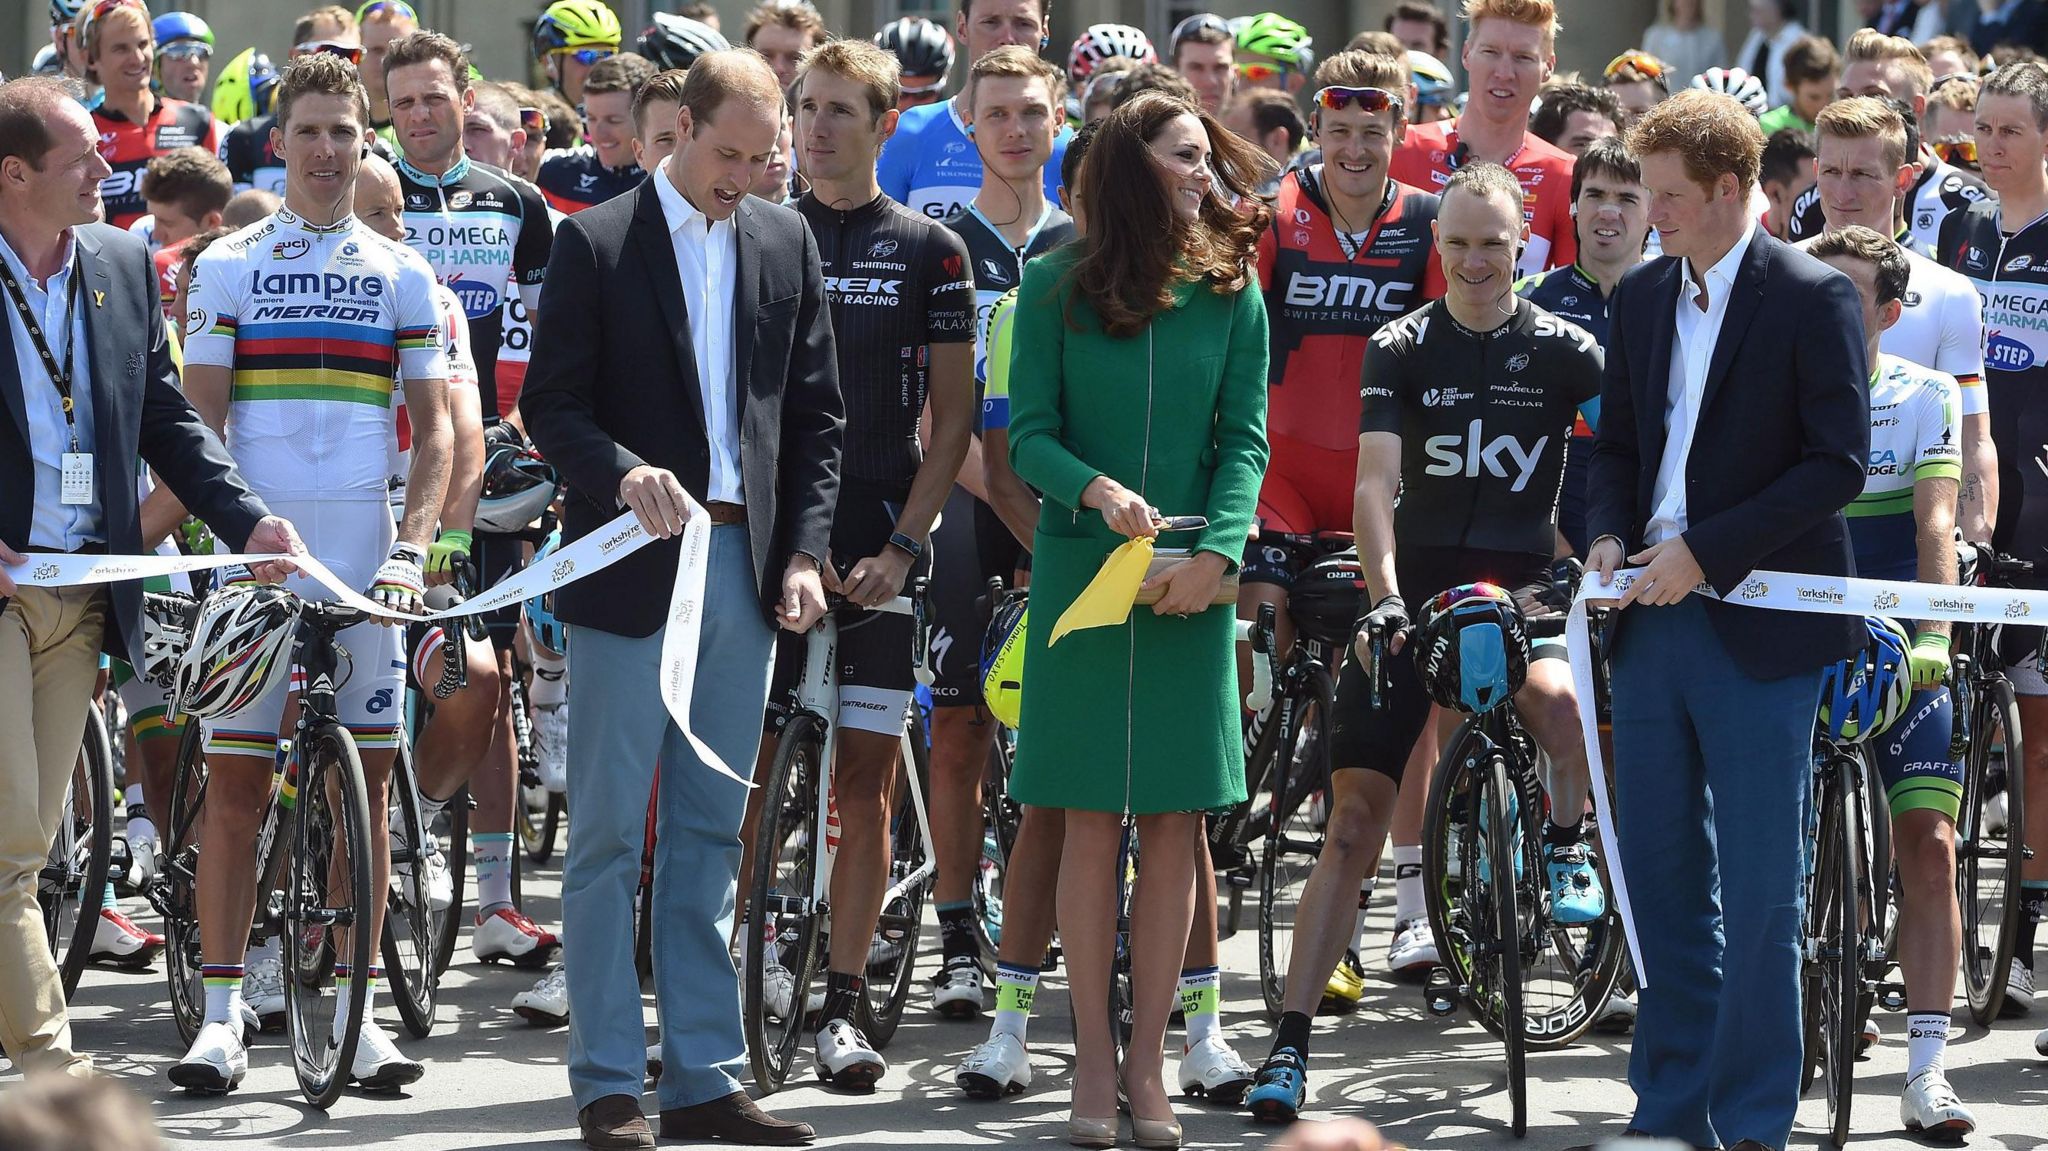 Prince William, Princess Kate and Prince Harry cut the starting tape at the 2014 Tour de France